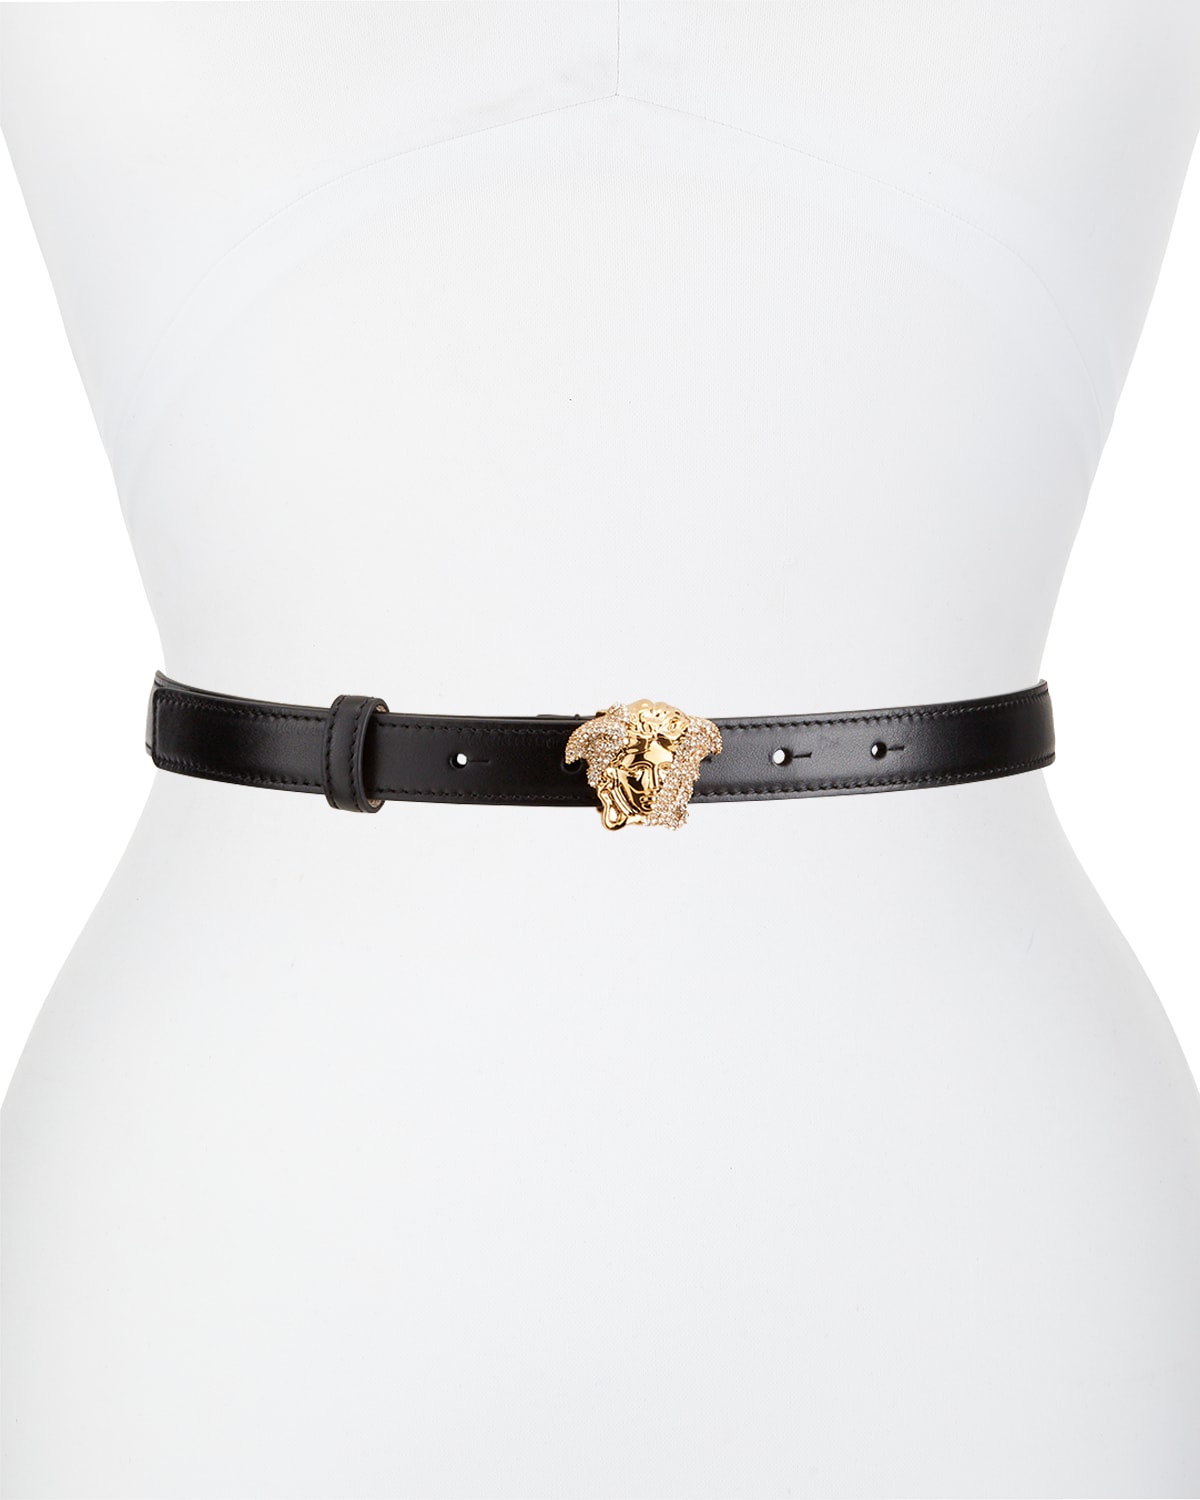 VERSACE PALAZZO DIA BELT WITH CRYSTAL-ENCRUSTED MEDUSA BUCKLE